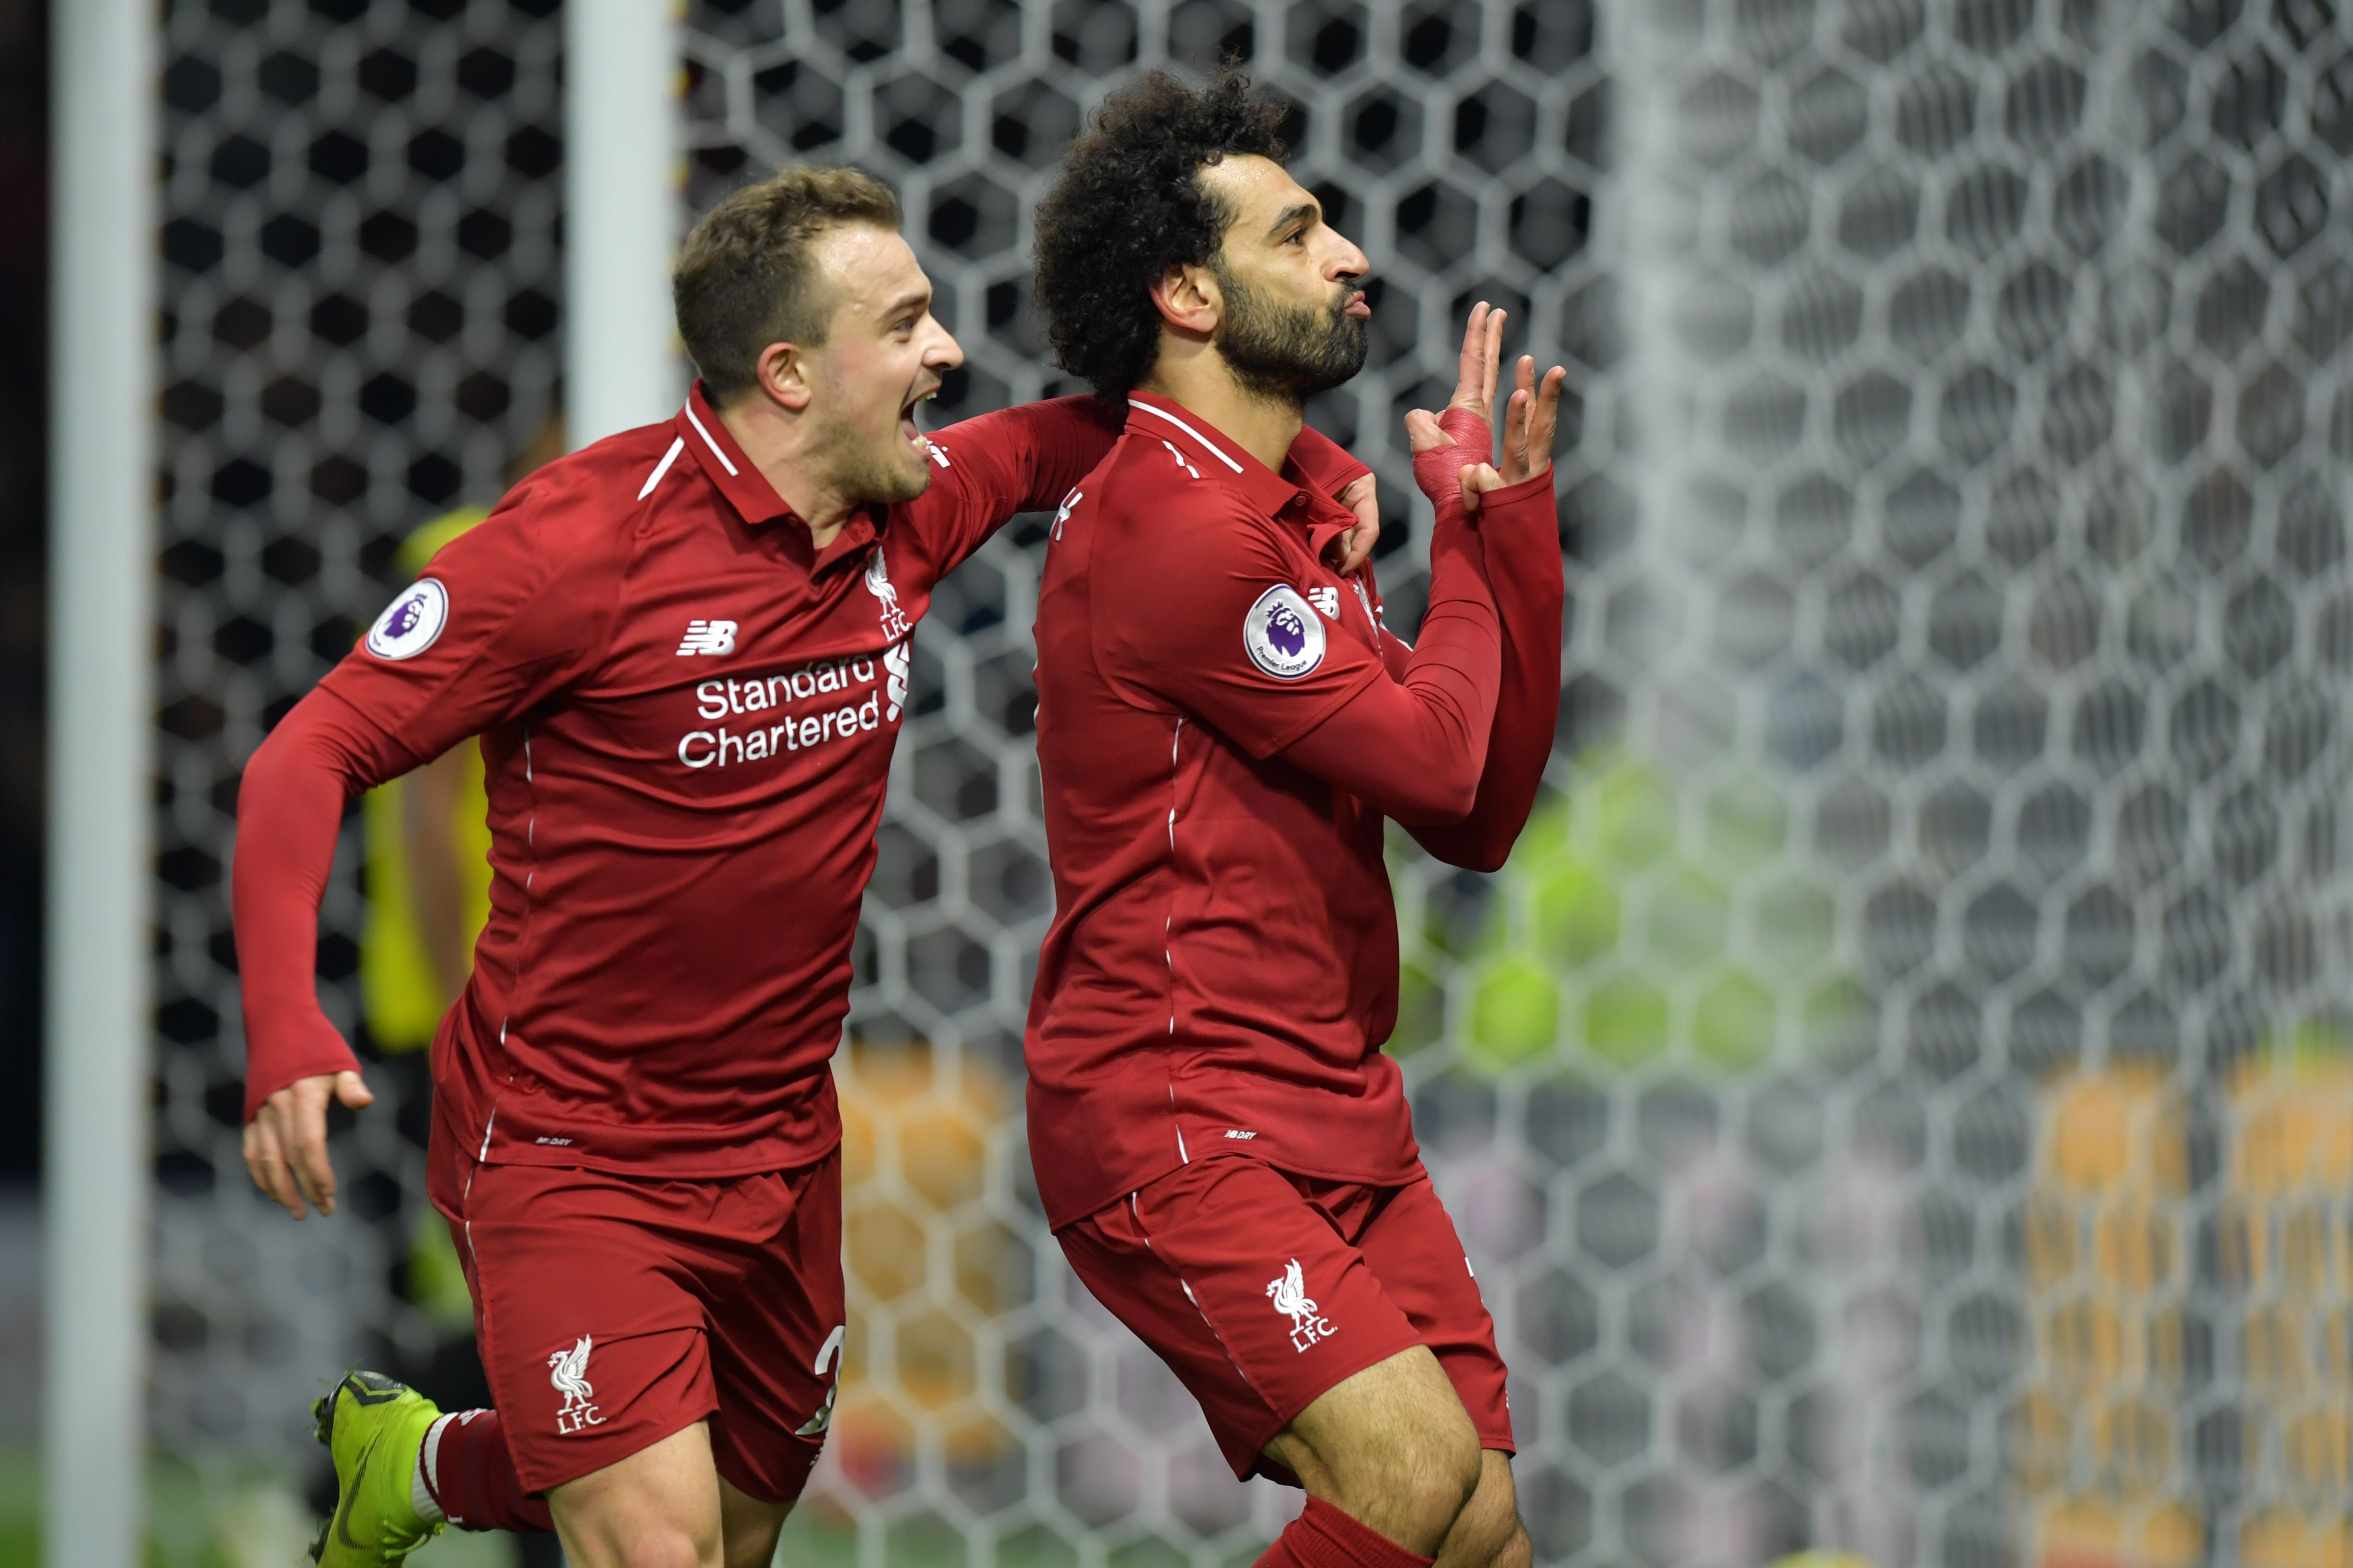 Liverpool's Egyptian midfielder Mohamed Salah (R) celebrates with Liverpool's Swiss midfielder Xherdan Shaqiri after scoring the opening goal of the English Premier League football match between Watford and Liverpool at Vicarage Road Stadium in Watford, north of London on November 24, 2018. (Photo by OLLY GREENWOOD / AFP) / RESTRICTED TO EDITORIAL USE. No use with unauthorized audio, video, data, fixture lists, club/league logos or 'live' services. Online in-match use limited to 120 images. An additional 40 images may be used in extra time. No video emulation. Social media in-match use limited to 120 images. An additional 40 images may be used in extra time. No use in betting publications, games or single club/league/player publications. /         (Photo credit should read OLLY GREENWOOD/AFP/Getty Images)